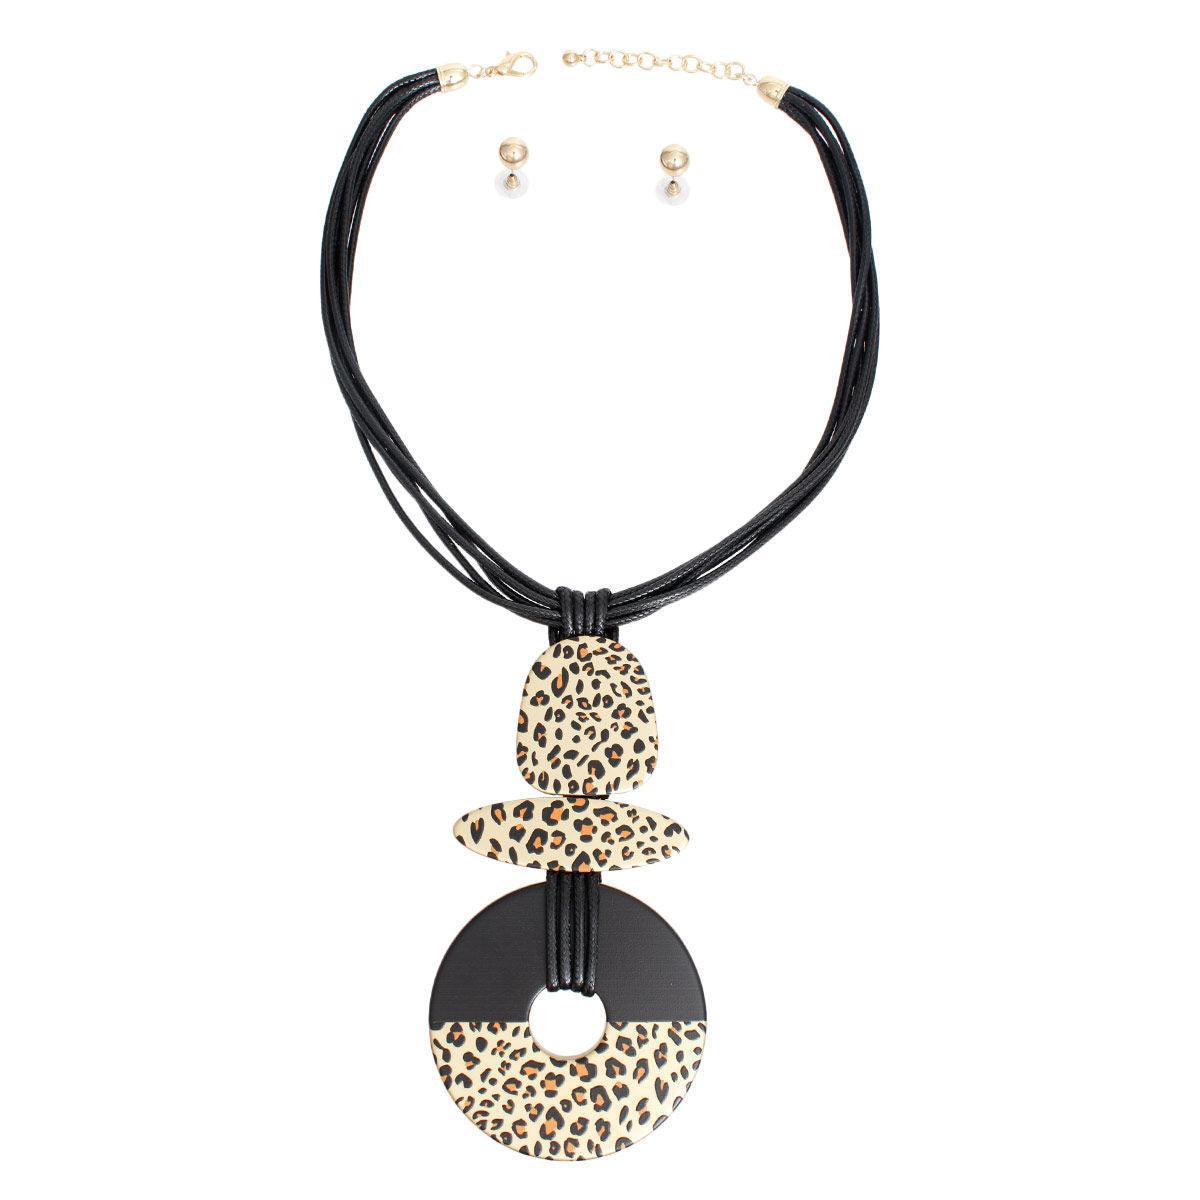 Get Wild with Our Open Circle Leopard Necklace Set!